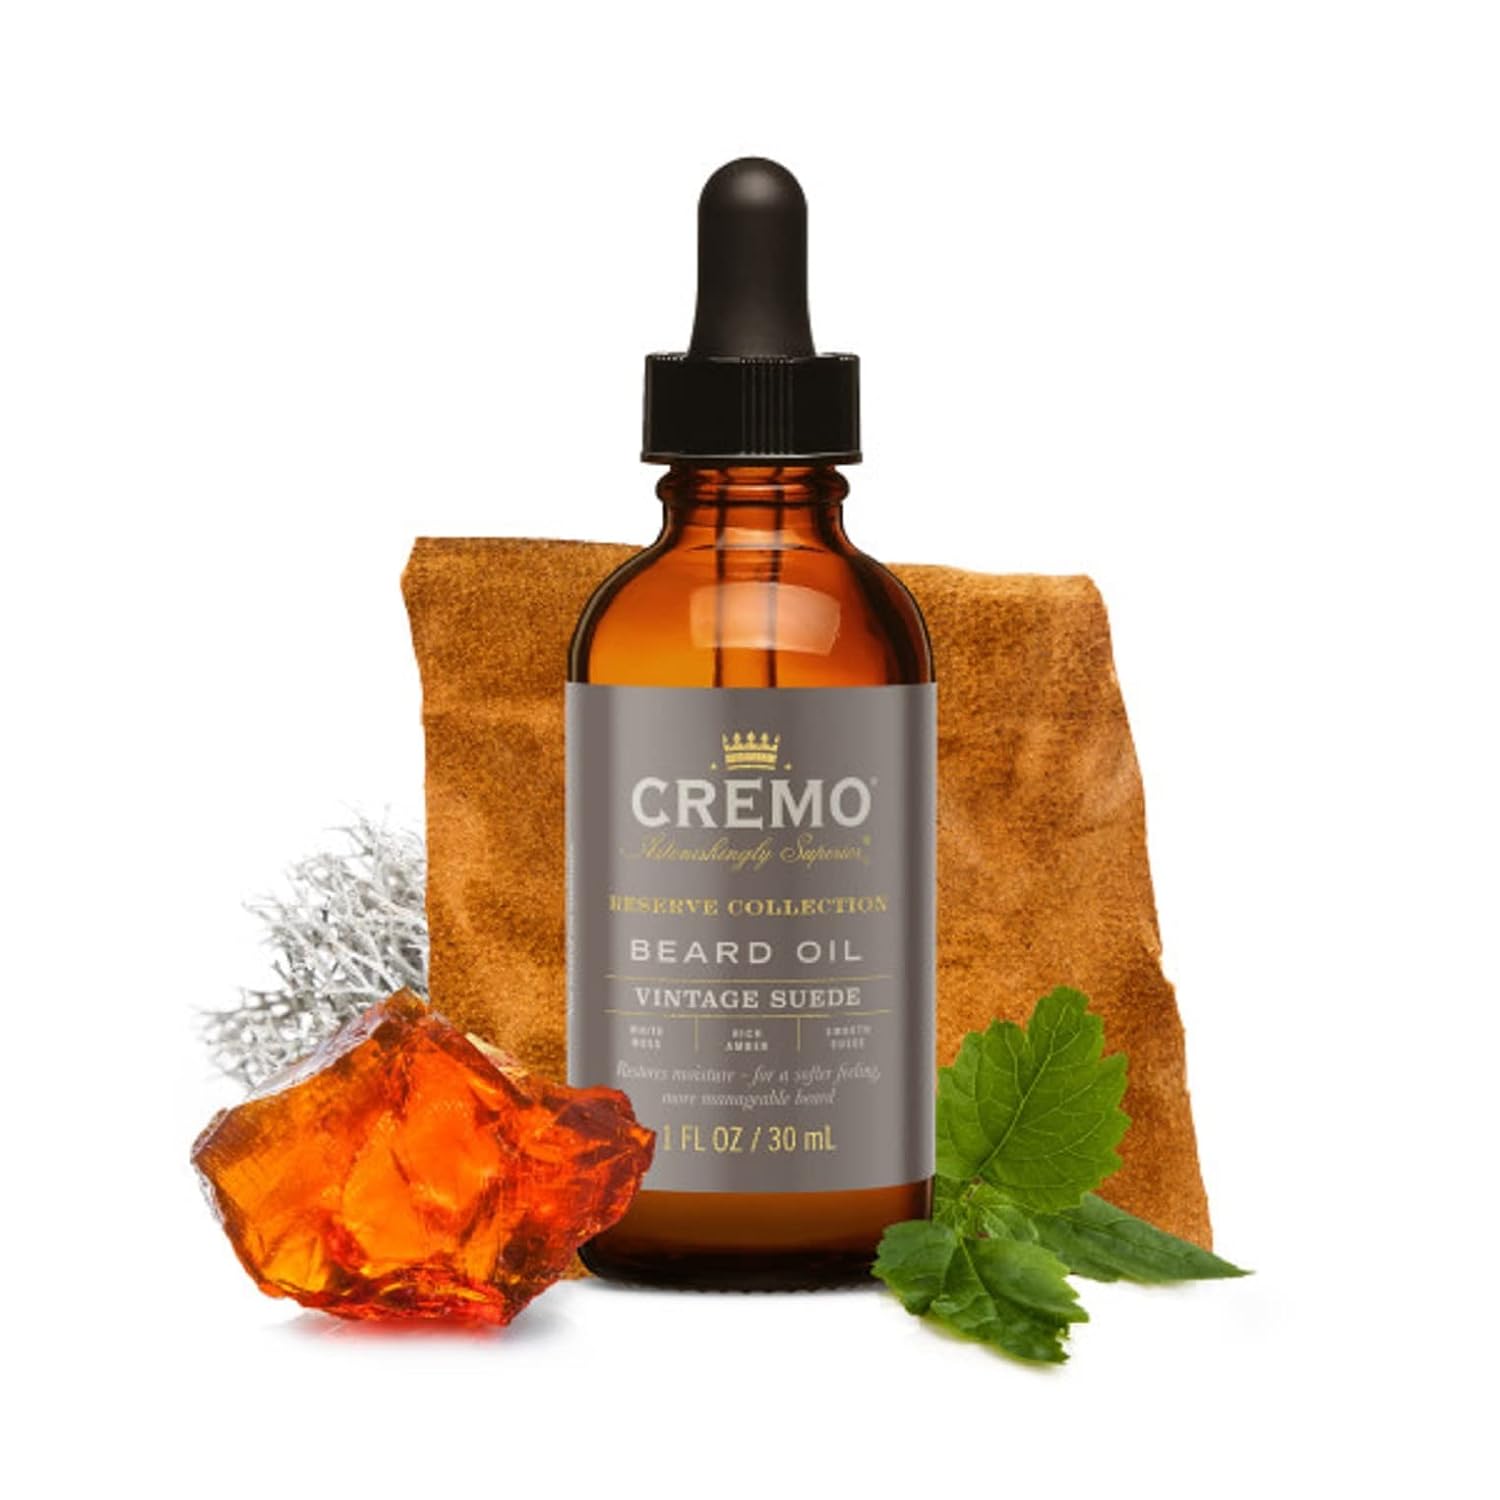 Cremo Beard Oil, Vintage Suede (Reserve Collection), 1 Fl Oz - Restore Natural Moisture and Soften Your Beard To Help Relieve Beard Itch : Beauty & Personal Care